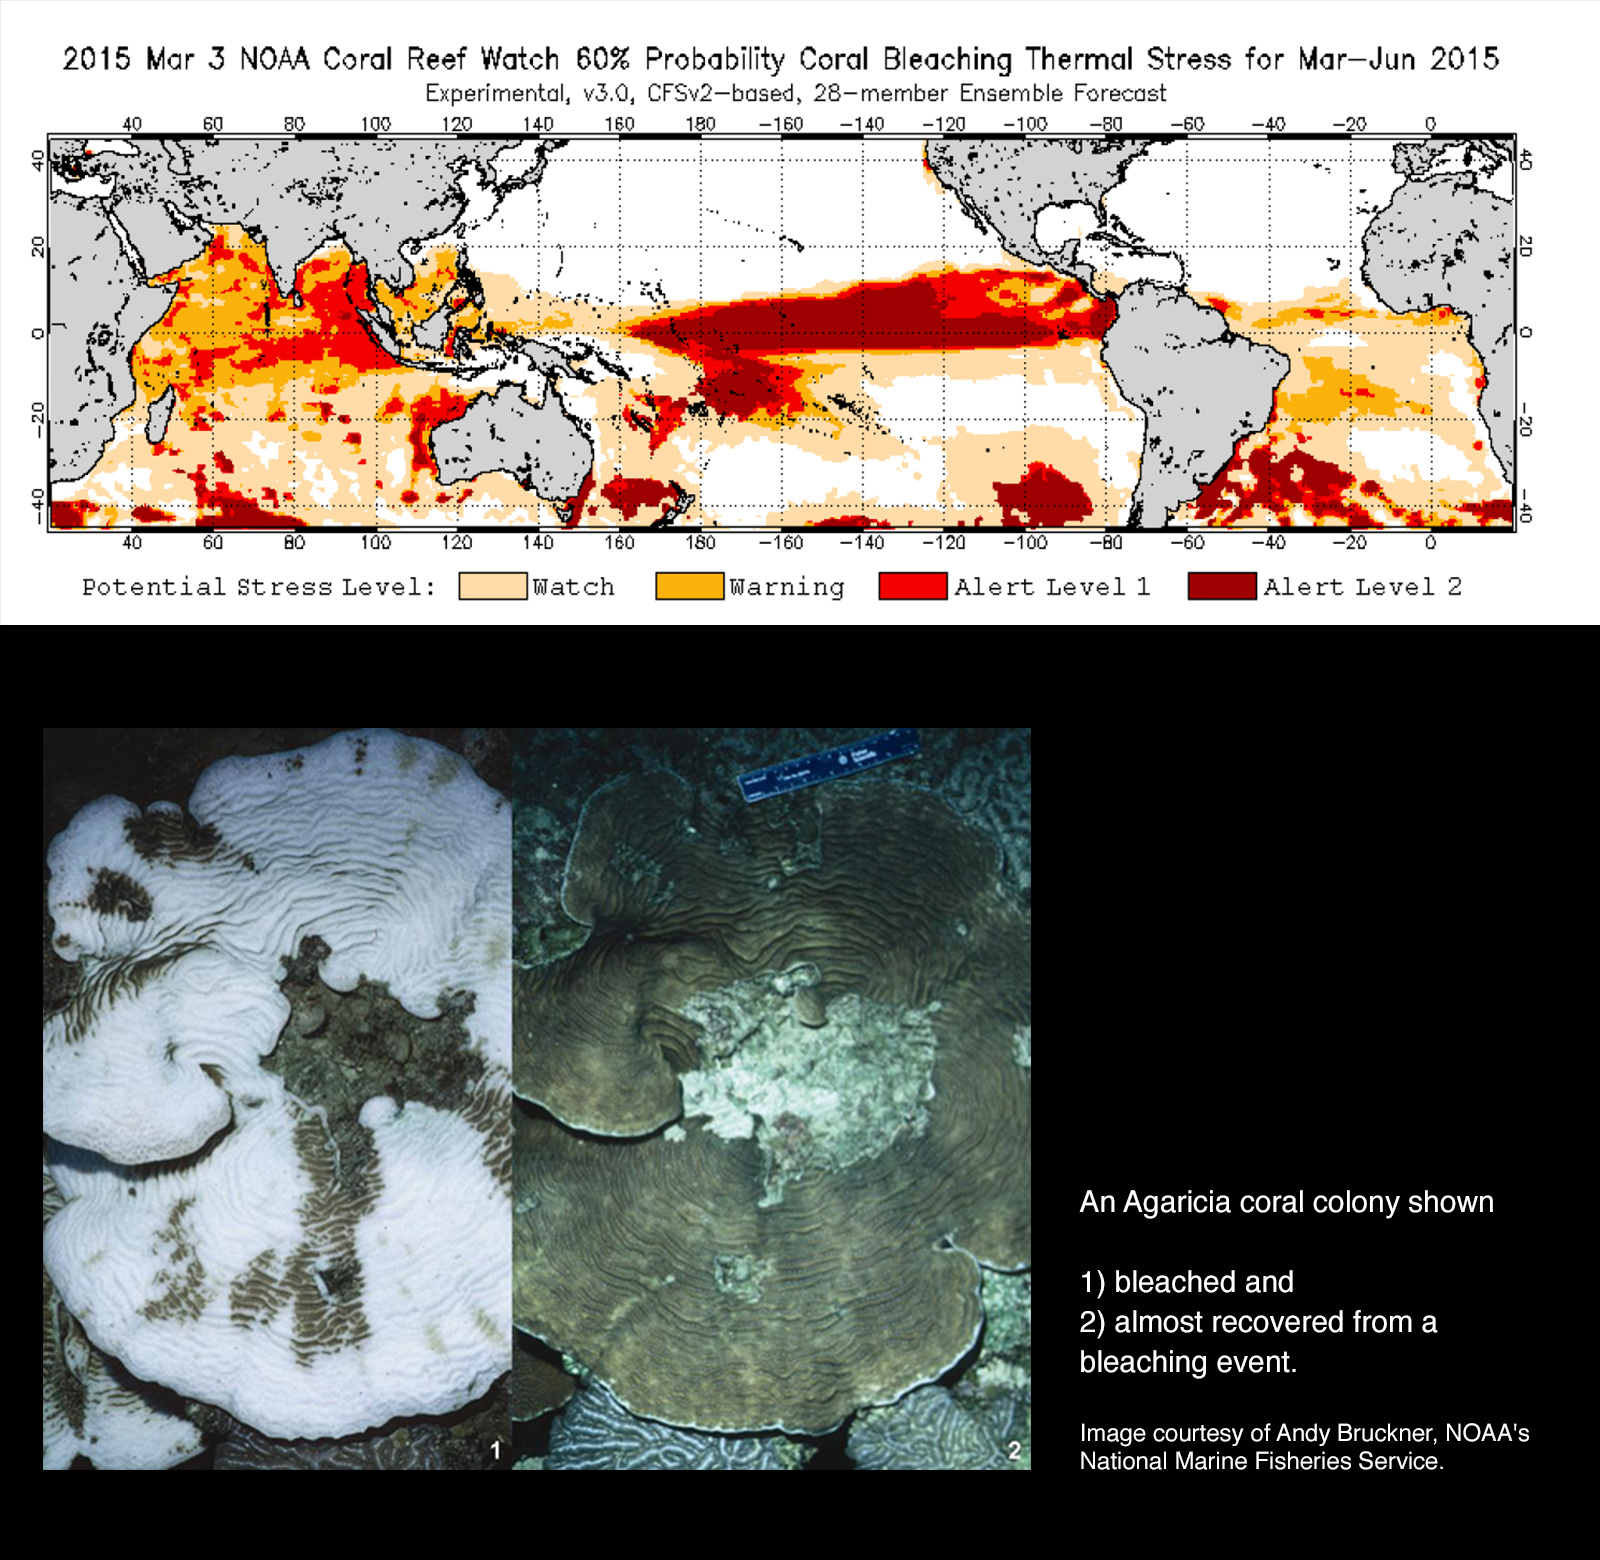 A composite image; at the top,  a data visualization based on NOAA satellite data shows in shades of orange the potential for coral bleaching worldwide in March 2015. The highest potential for bleaching is located in the tropics and particularly a long stretch of the Pacific. Below that is an example of coral bleaching, showing a coral that has gone nearly completely white and the same coral nearly recovered.